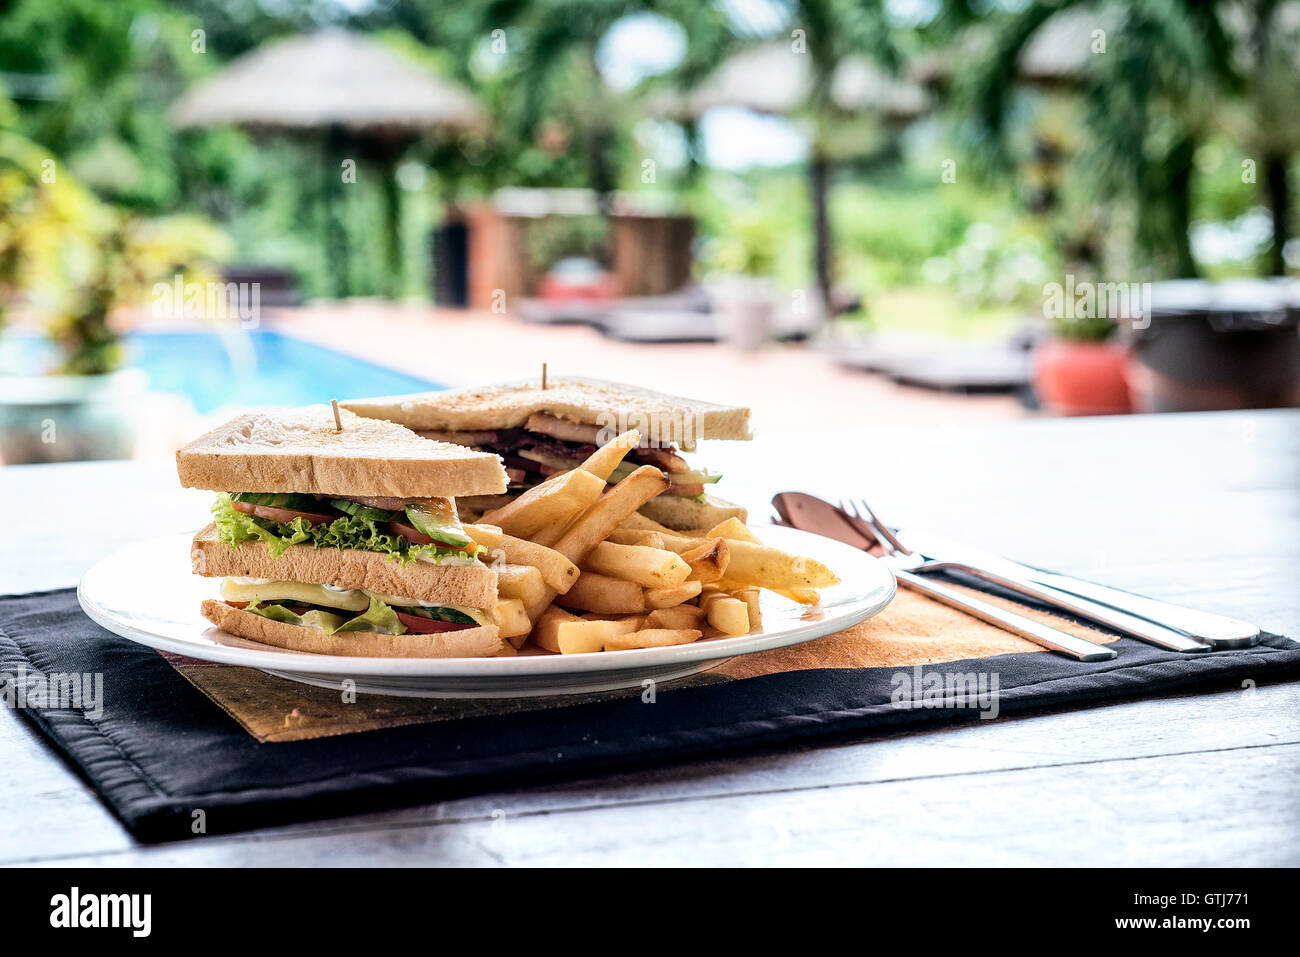 club sandwich snack with french fries on plate in tropical outdoors pool setting Stock Photo